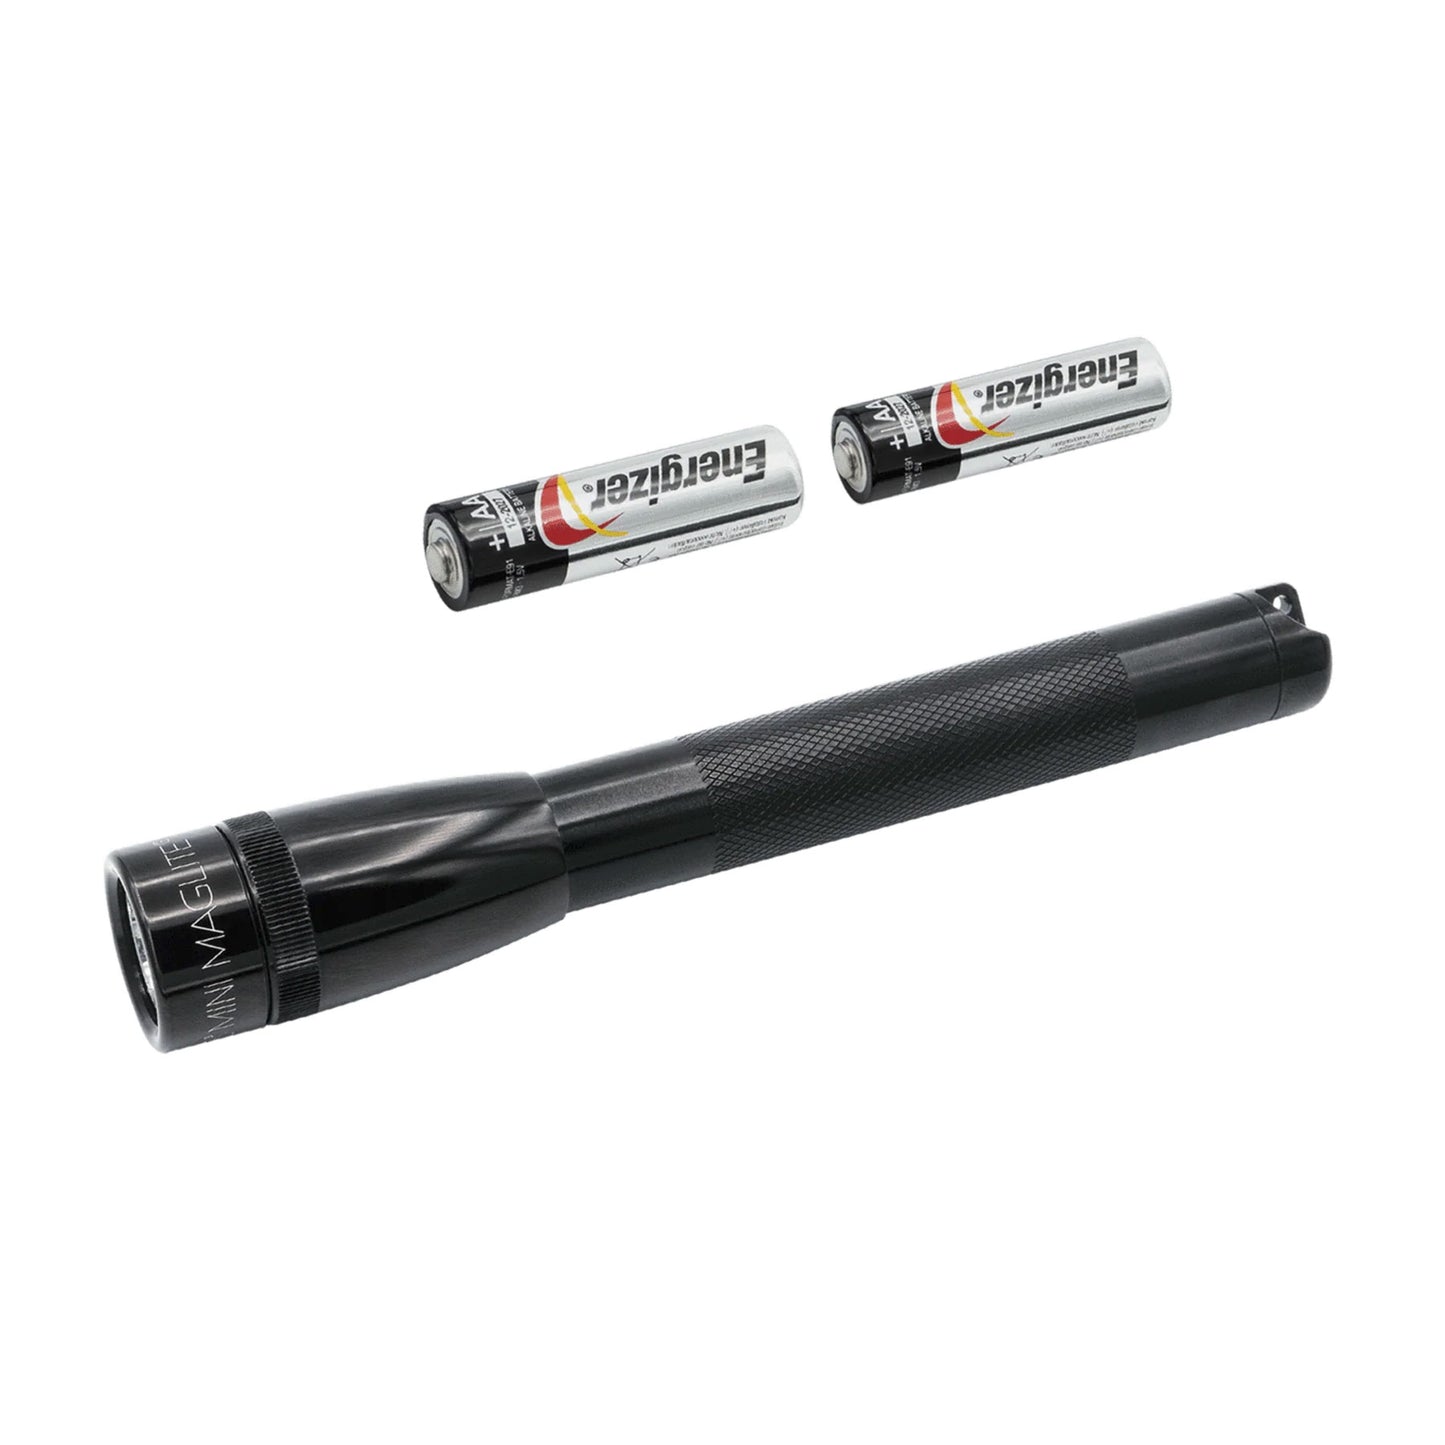 Maglite Mini Mag LED AA Cell Torch - Black